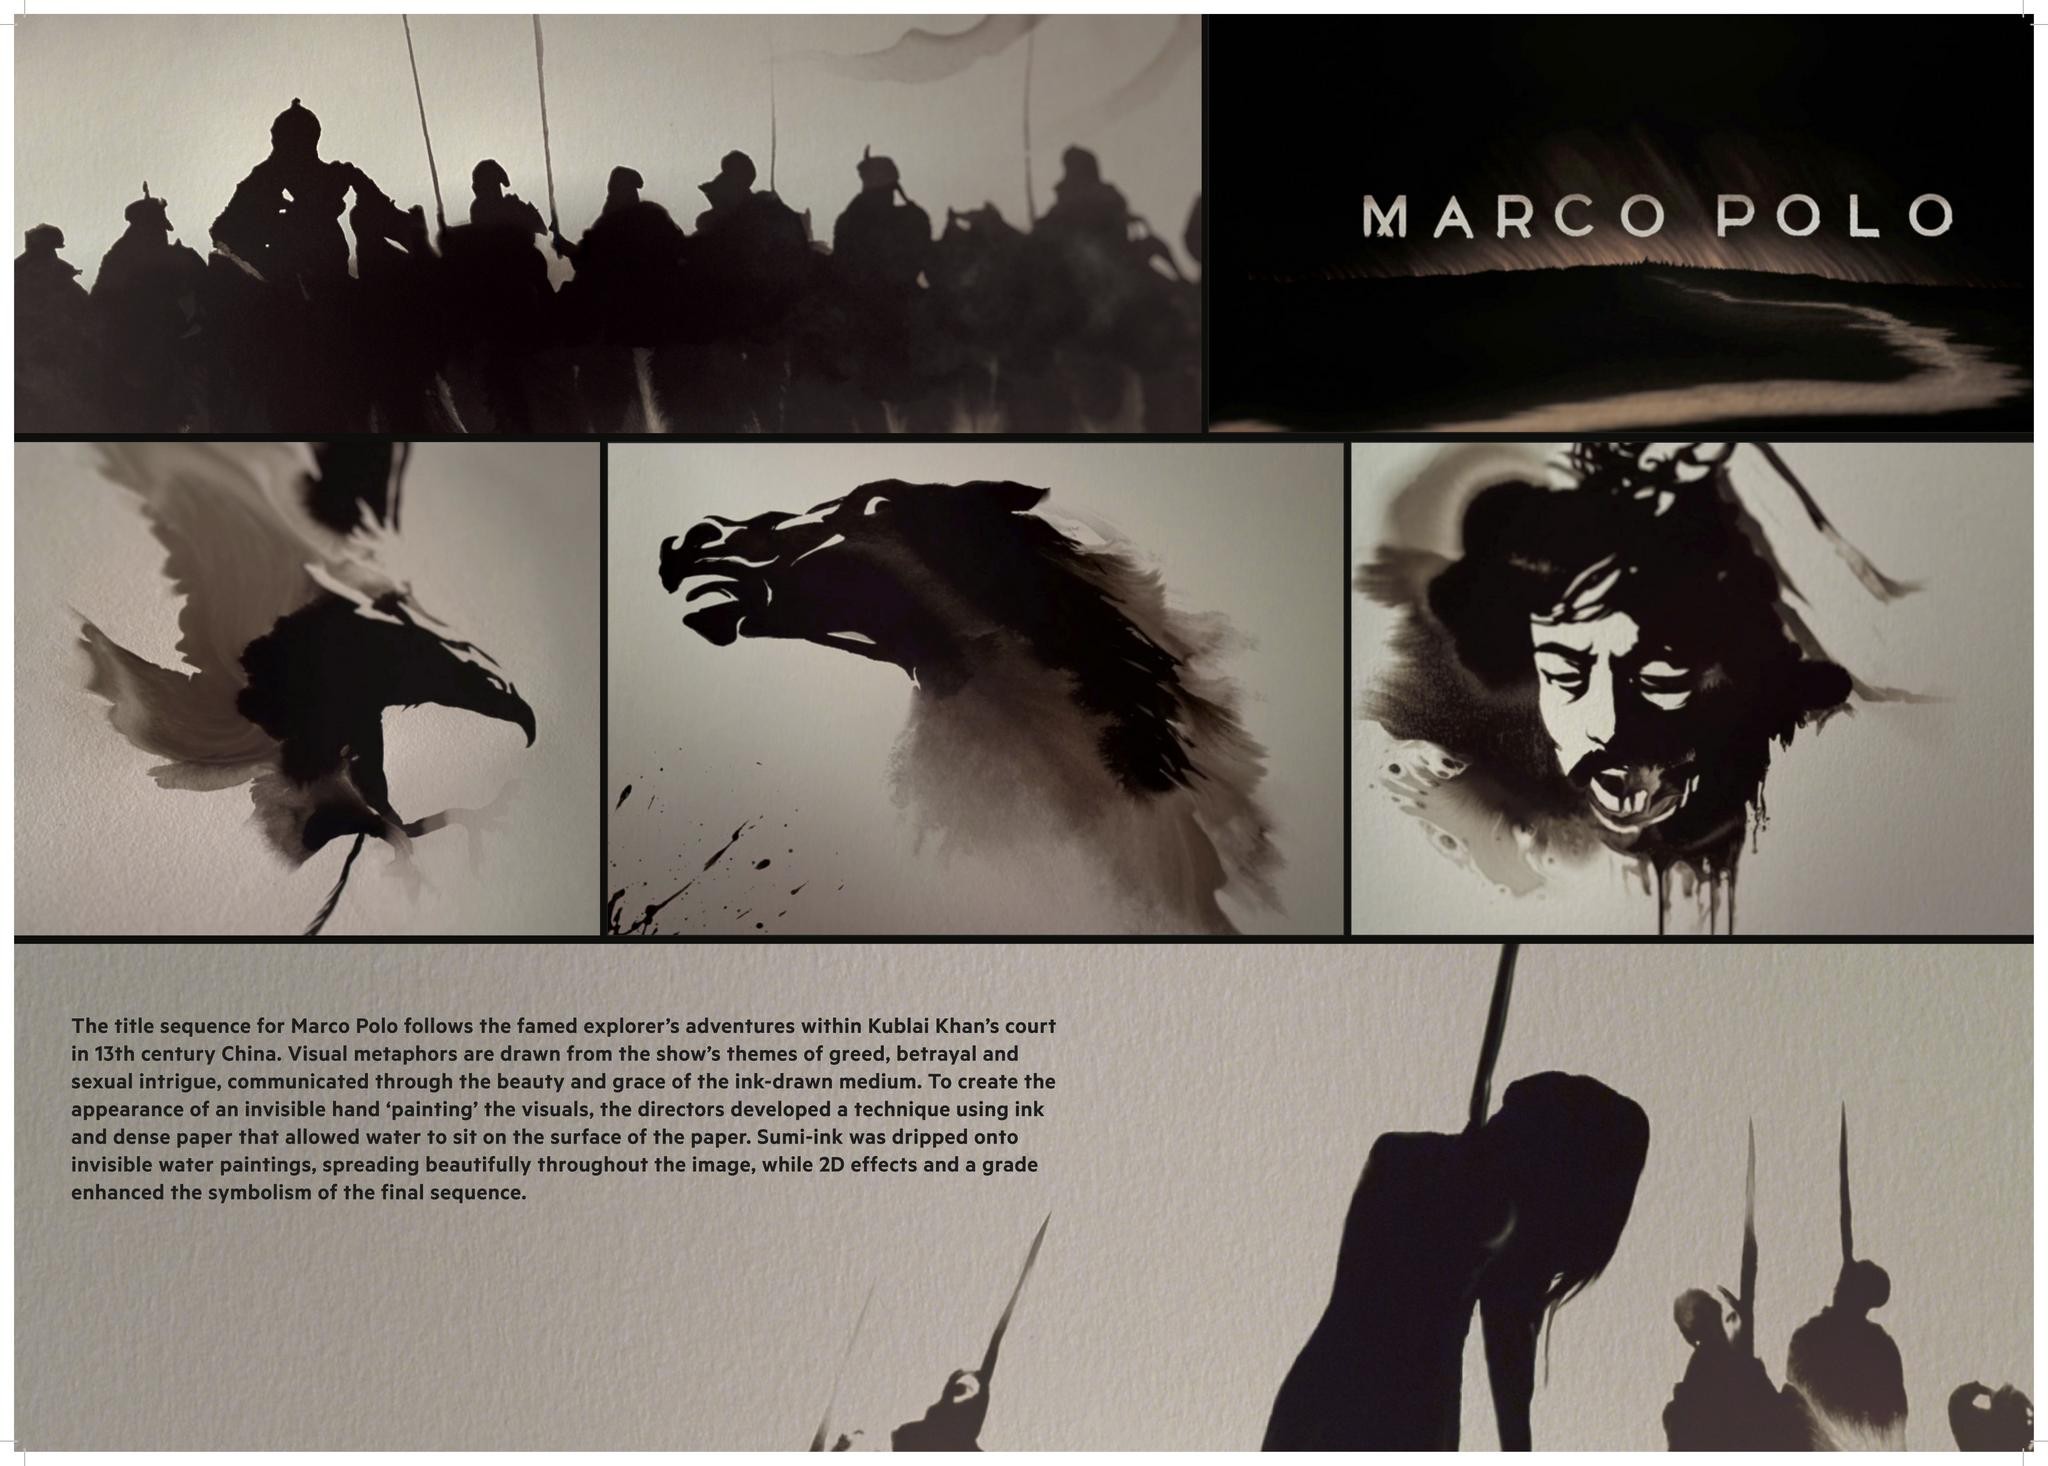 MARCO POLO TITLE SEQUENCE